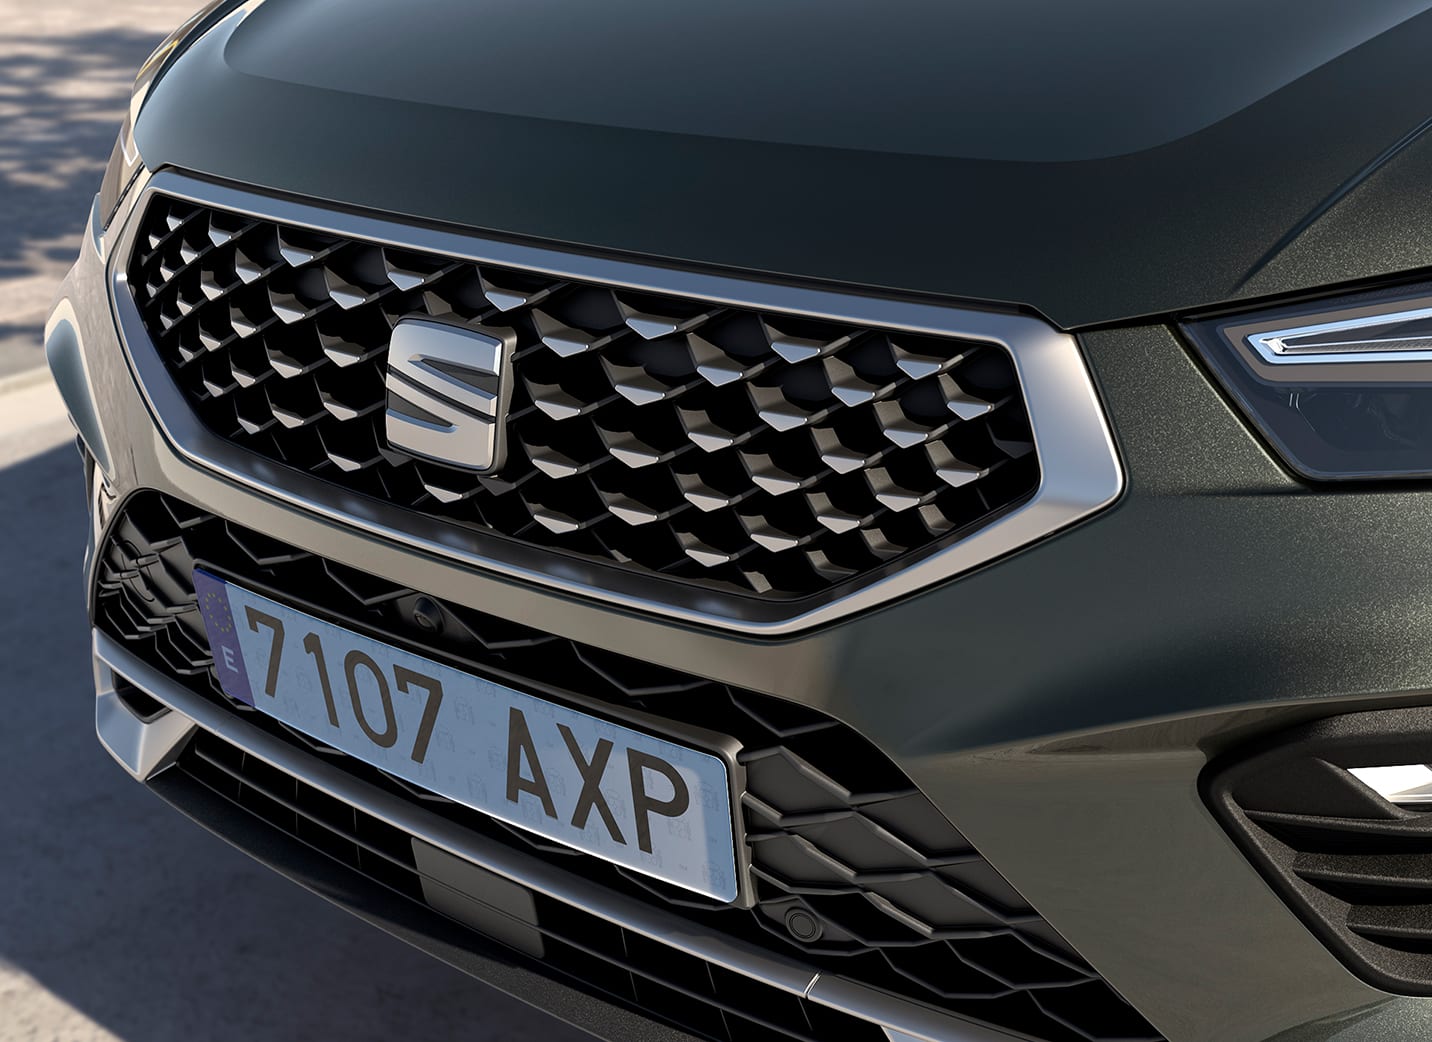 New SEAT Ateca in dark camouflage front view front grille with reflex silver elements